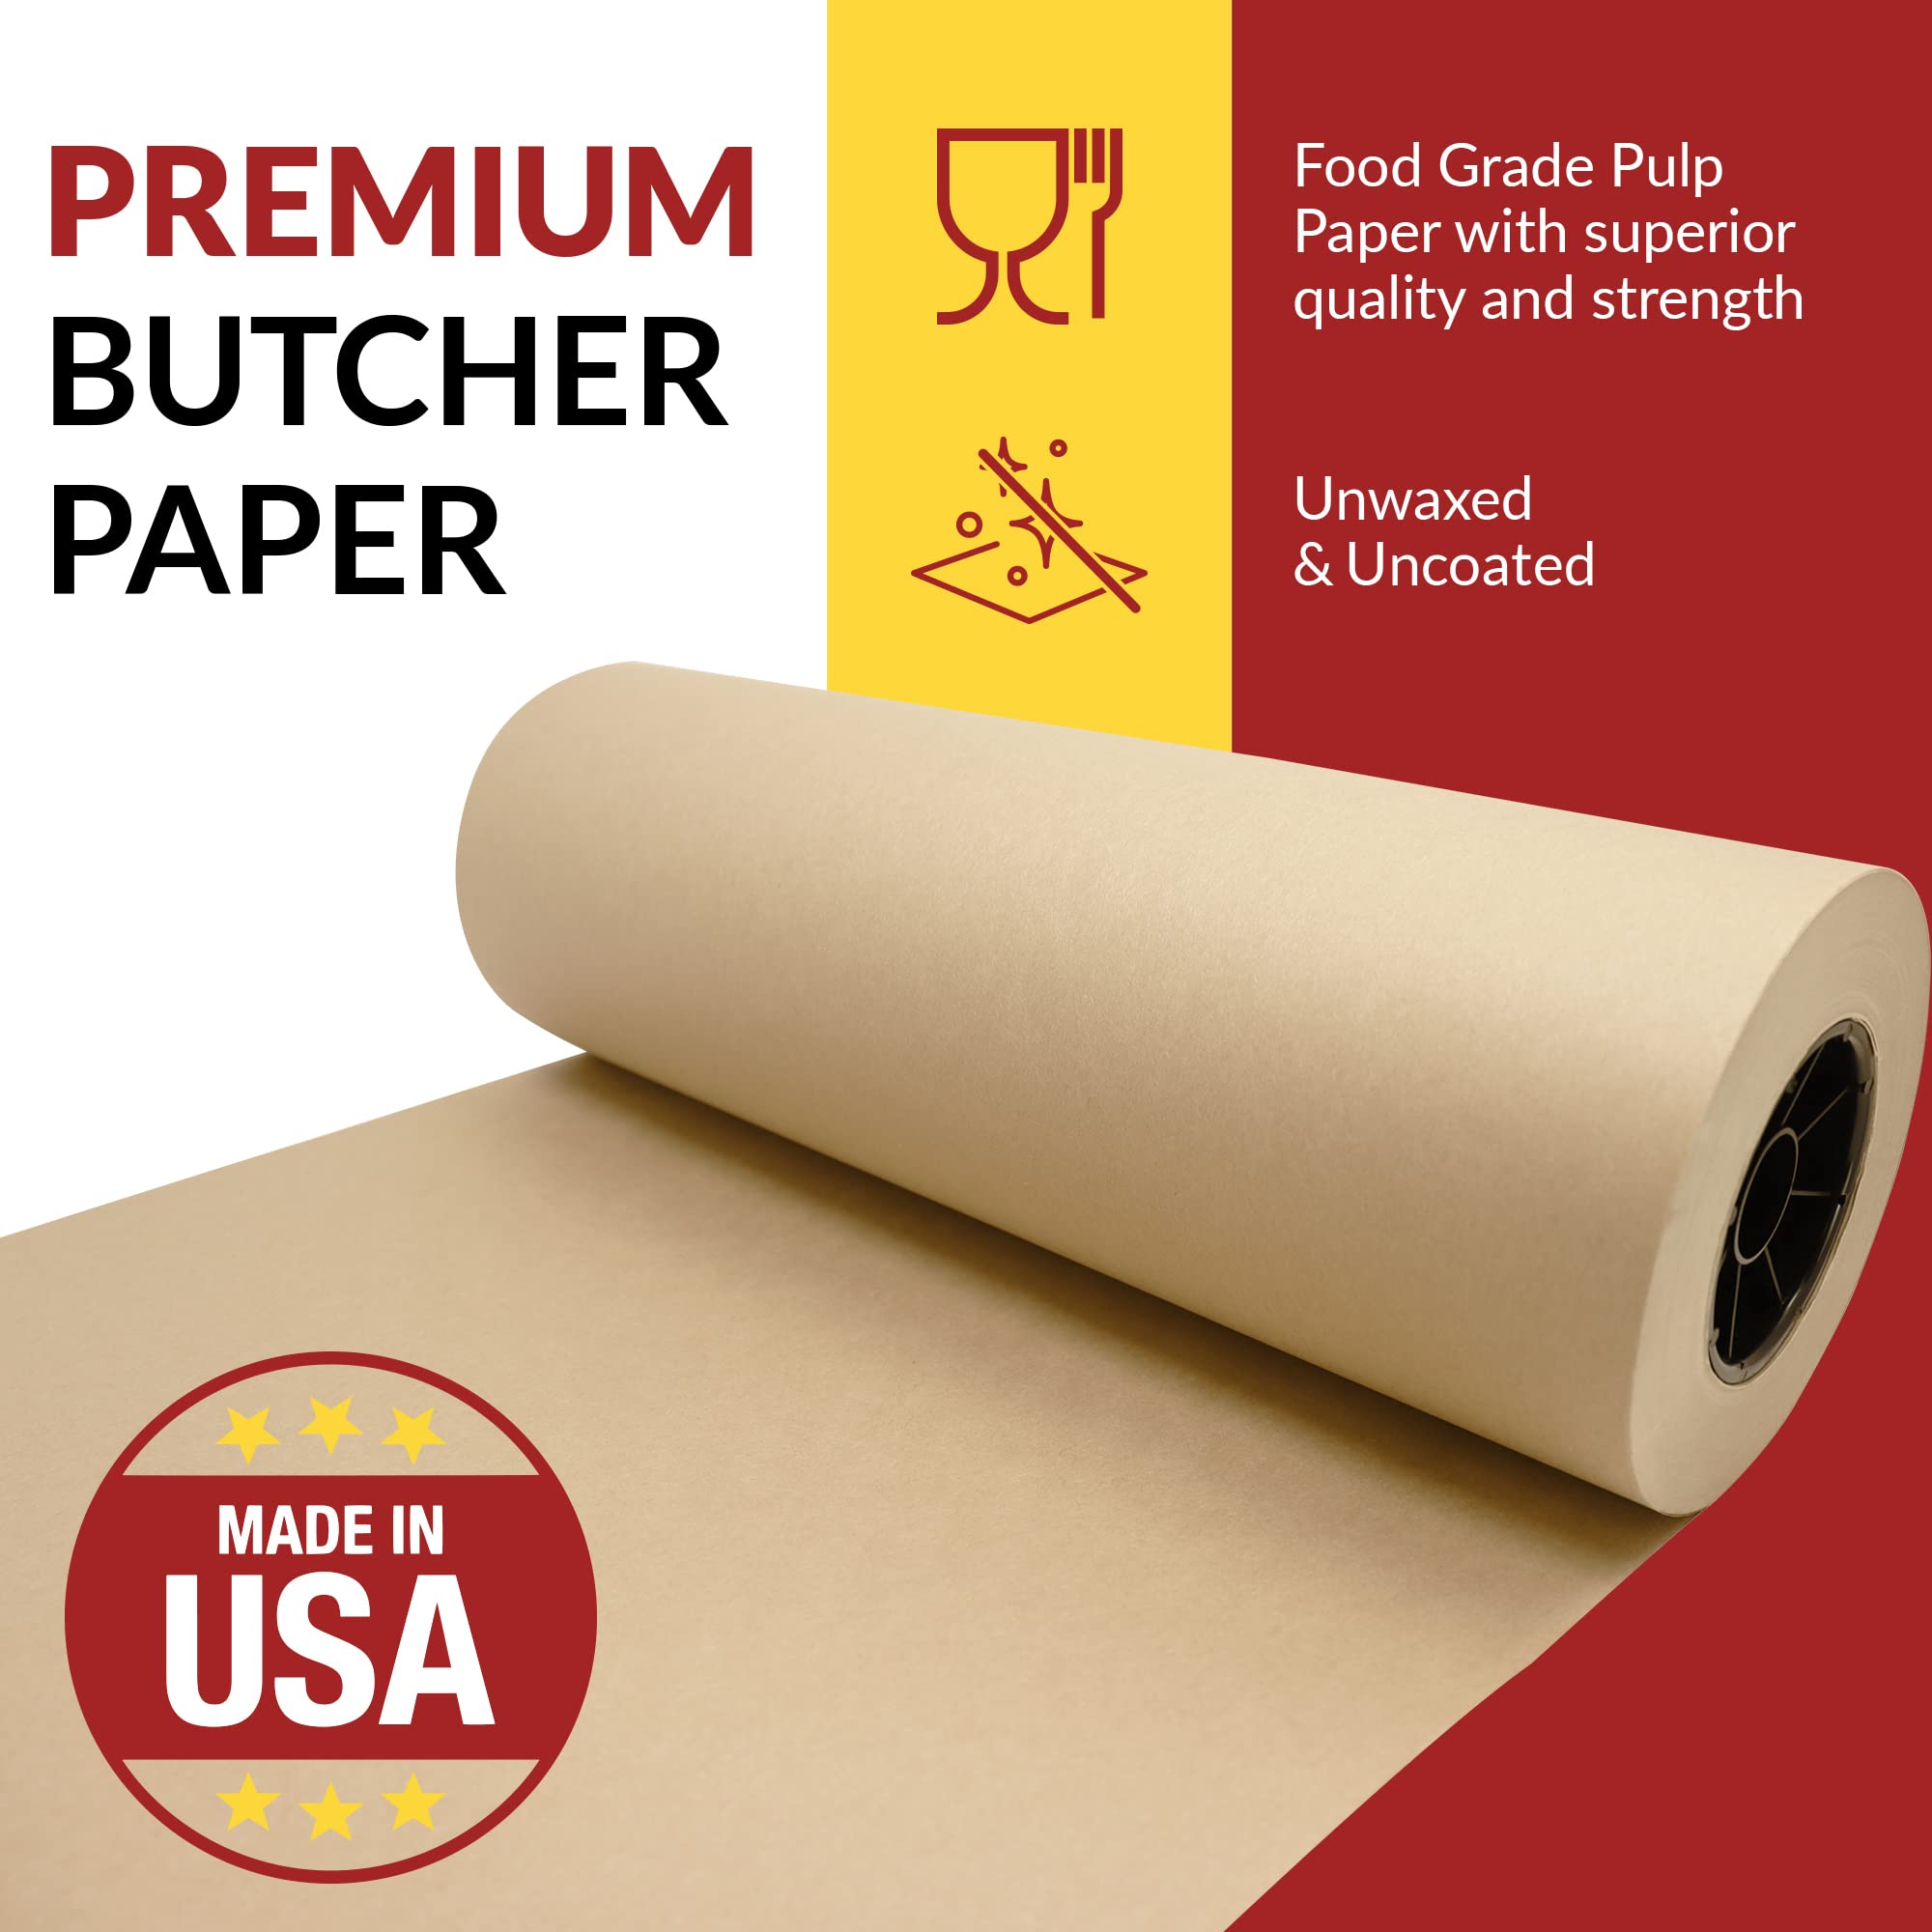 Made in USA | Bulk Value 17.25 in x 350 ft (4200 in) Reli. Brown Butcher Paper w/Dispenser Box | Serrated Cutting Blade | Food Grade Kraft Butcher Paper for Smoking Meat | Unwaxed, Meat Wrapping